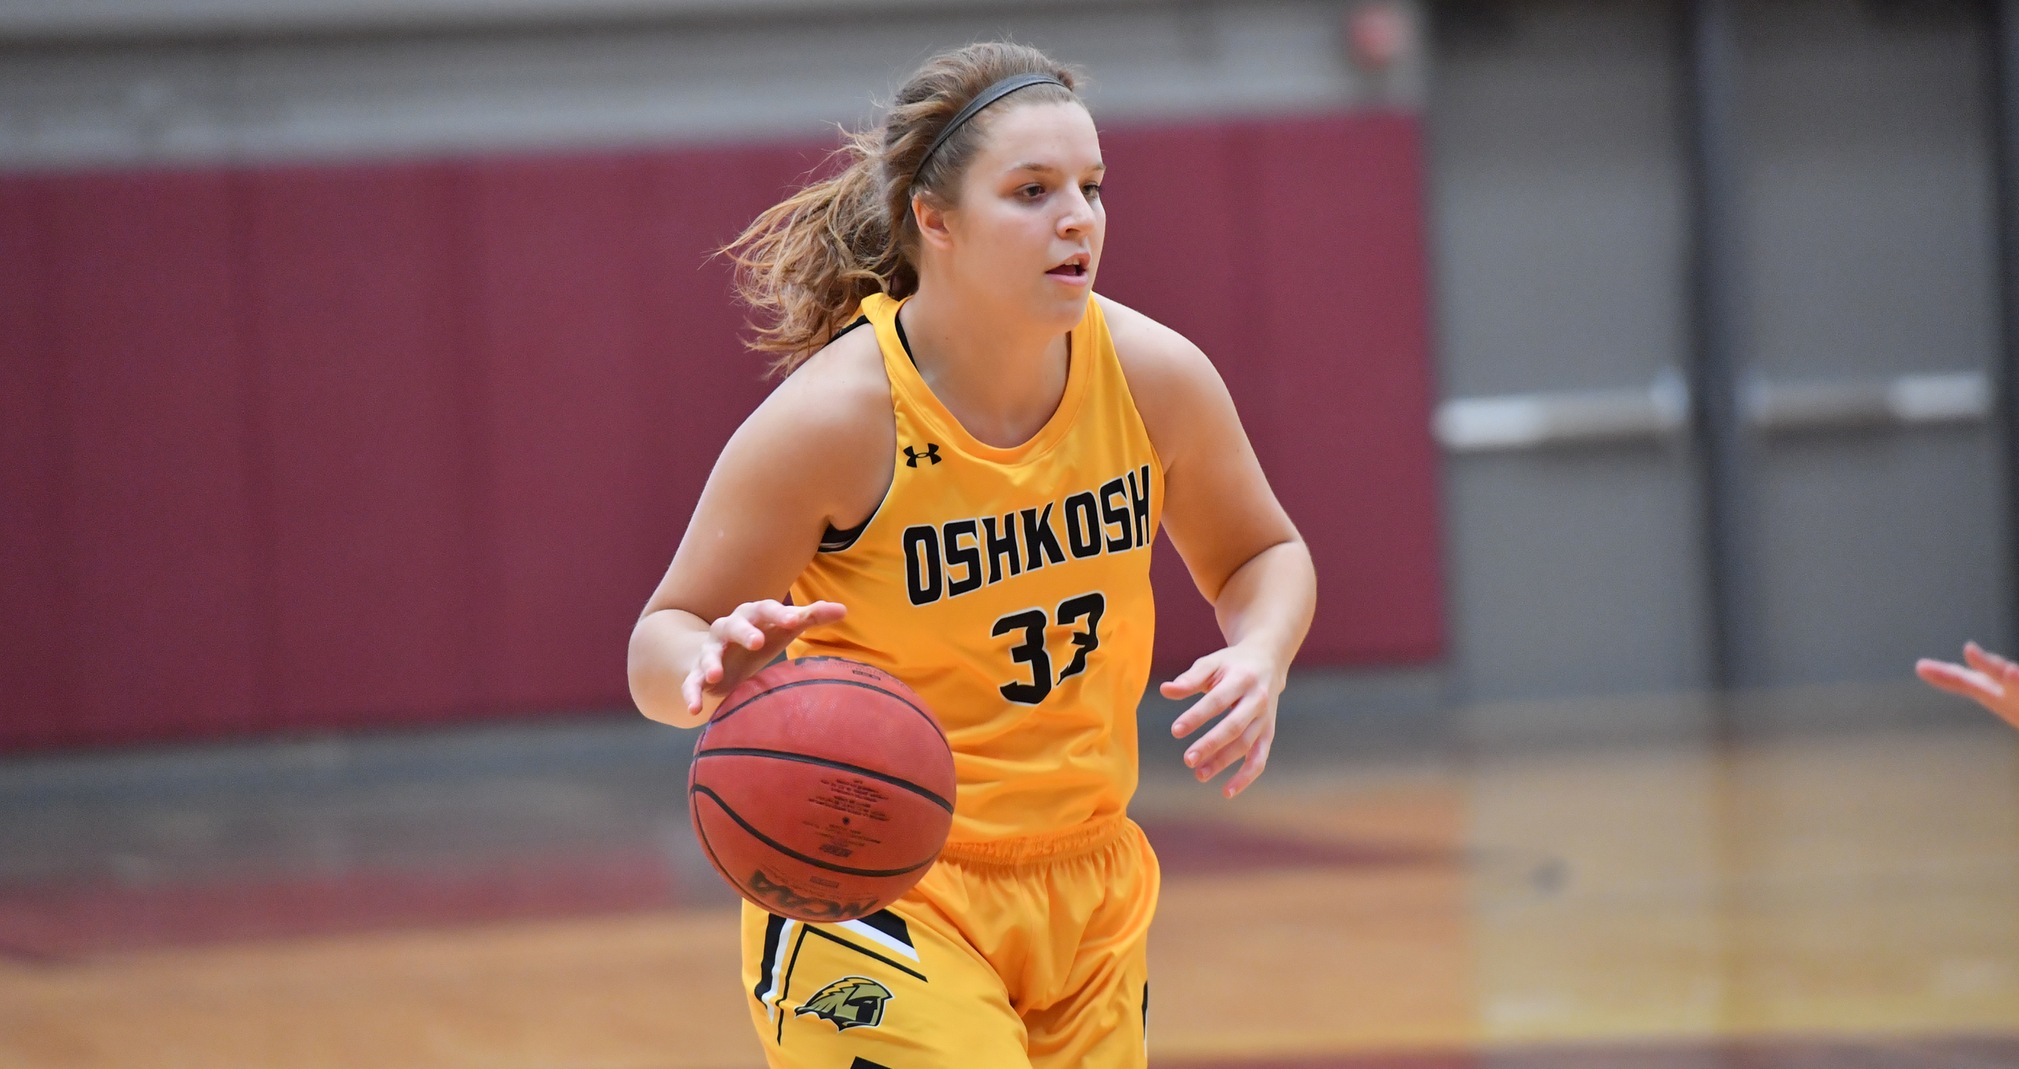 Nikki Arneson scored a career-high 28 points against the Warhawks with the help of five 3-point baskets.